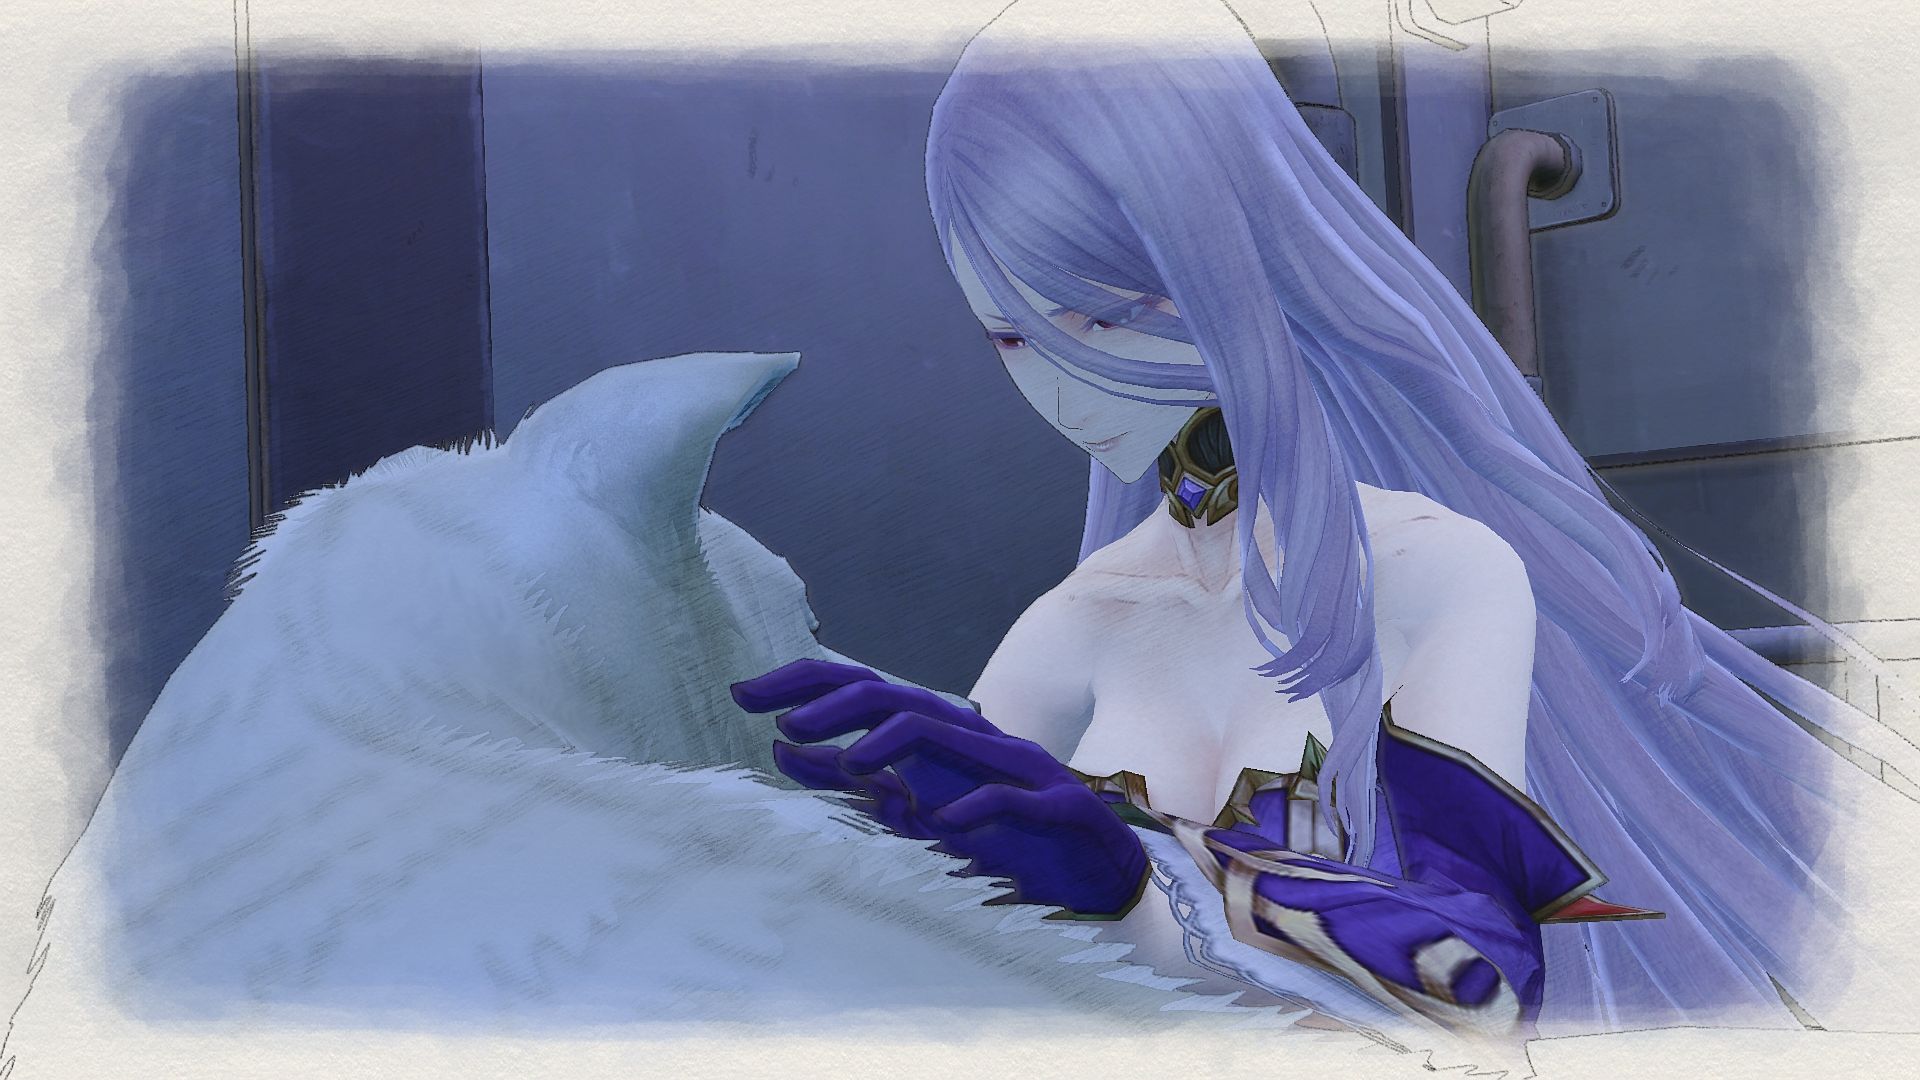 http://www.perfectly-nintendo.com/wp-content/gallery/valkyria-chronicles-4-27-12-2017/3.jpg